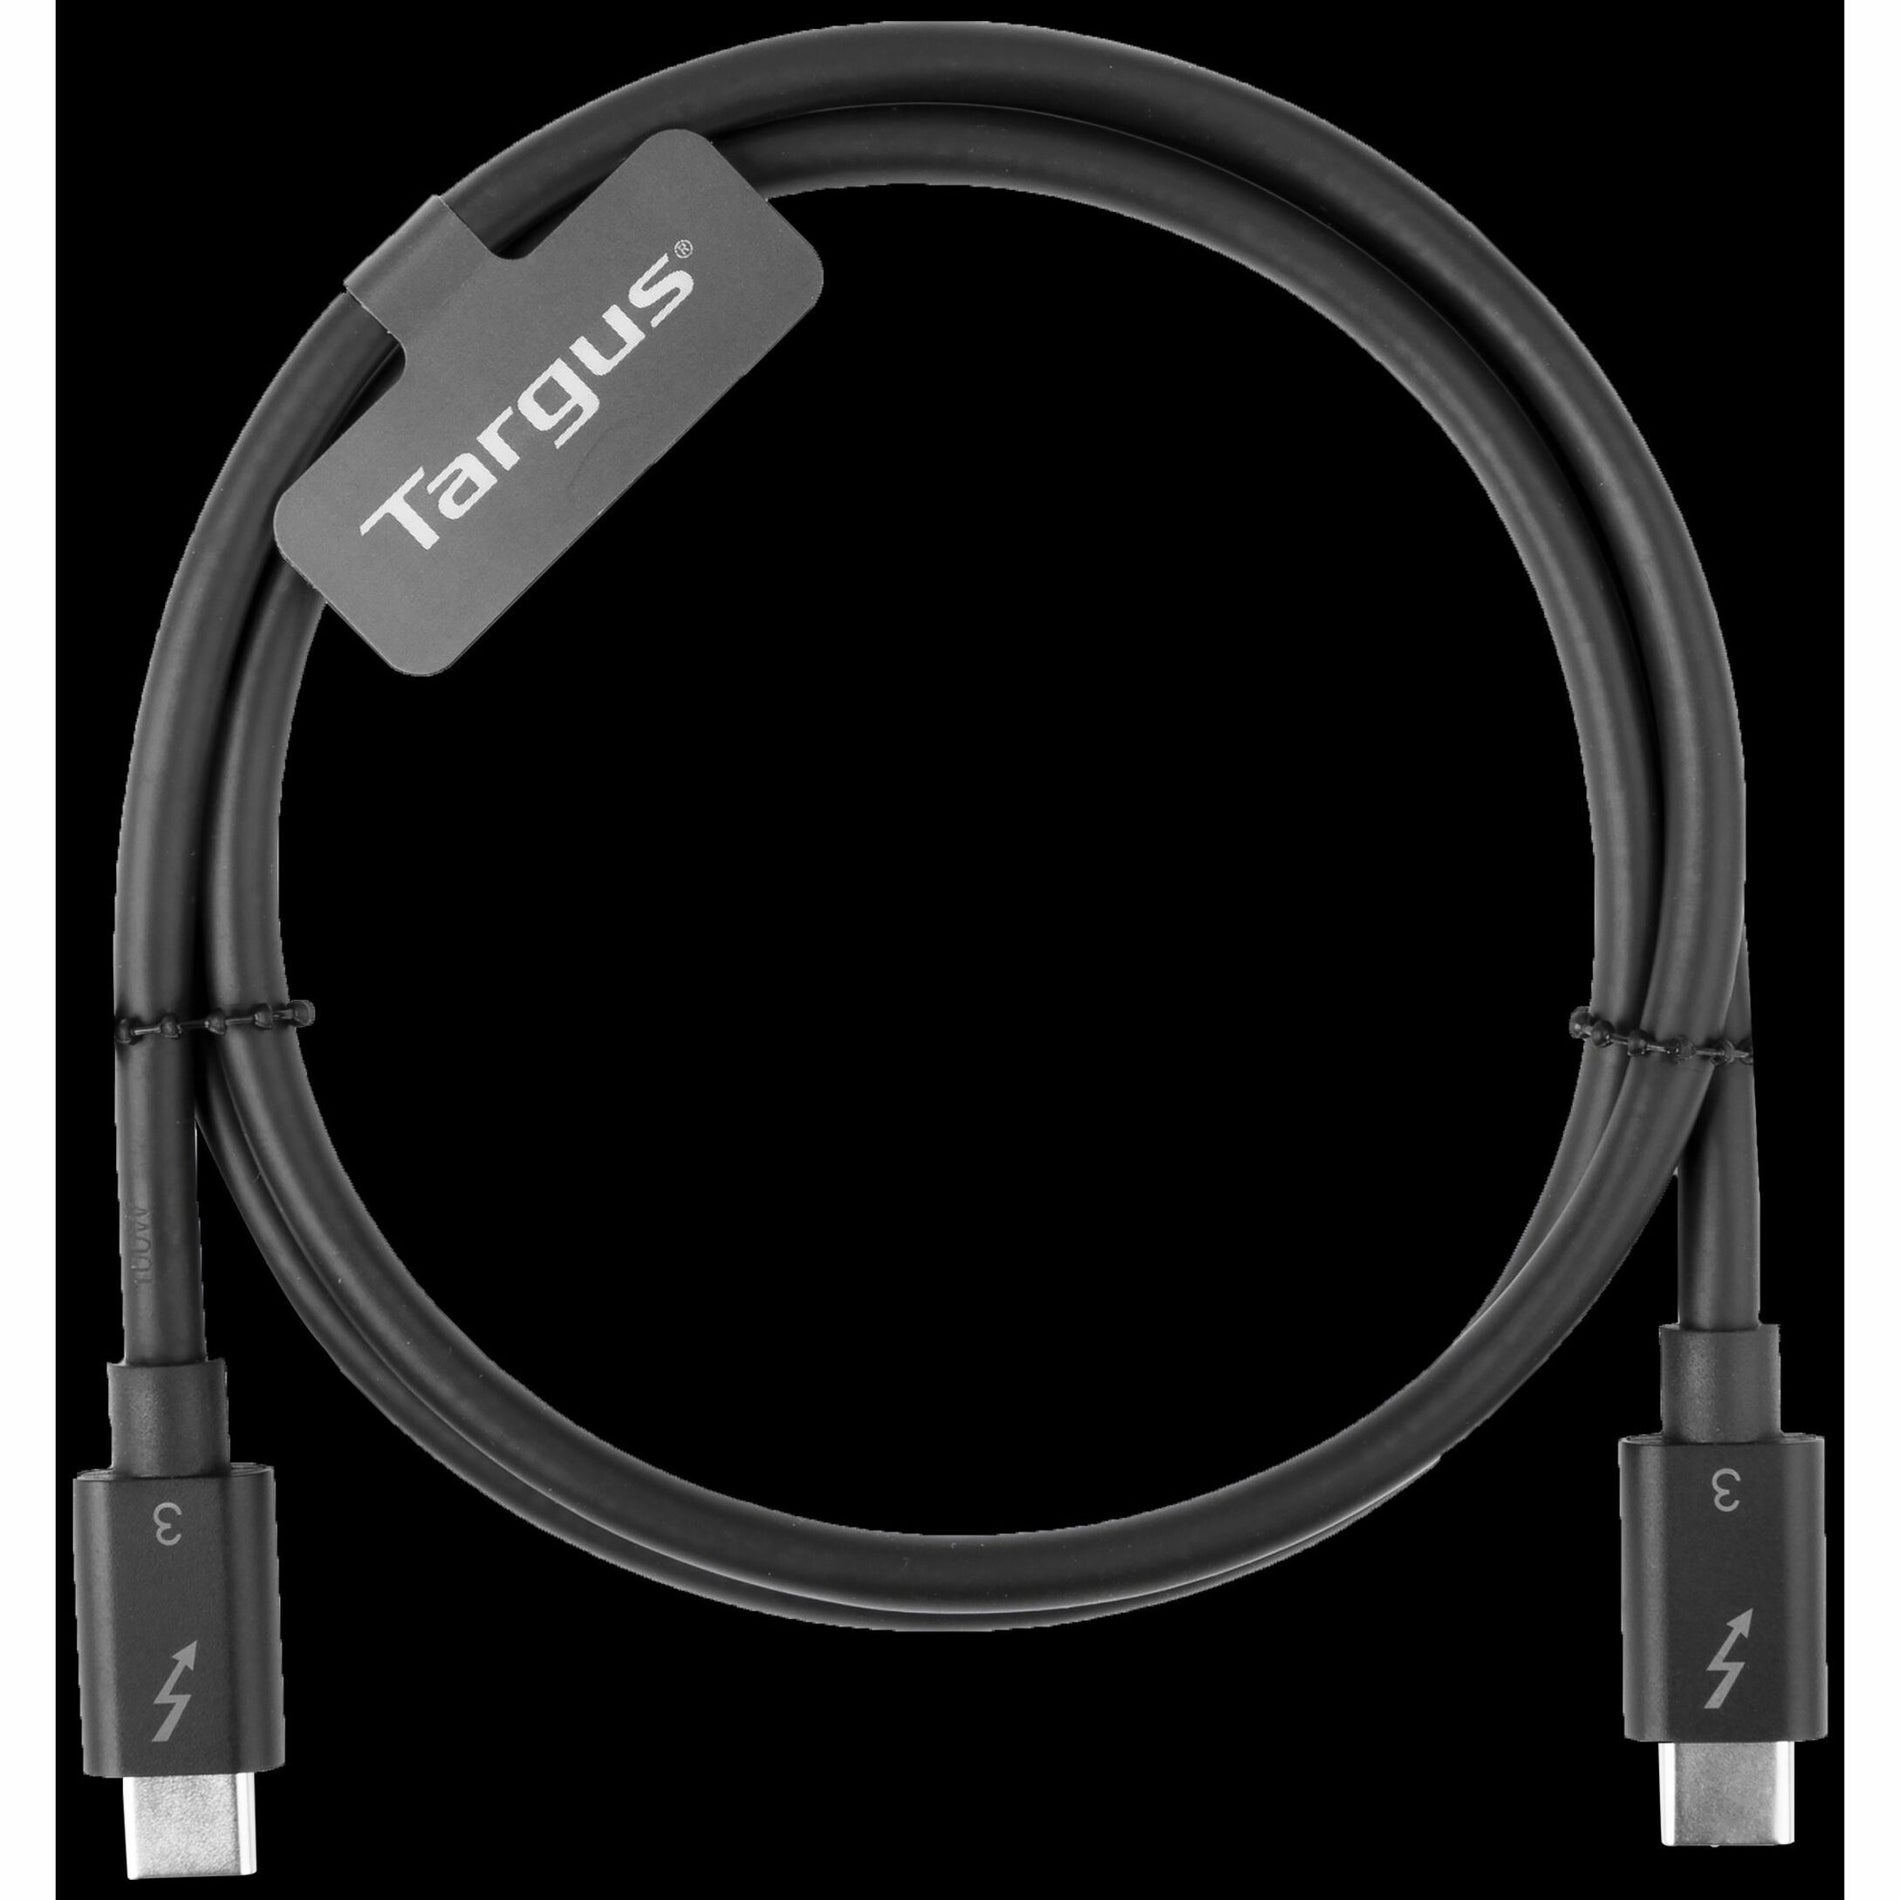 Targus ACC1128GLX 0.8M USB-C Male to USB-C Male Thunderbolt 3 Cable, 40Gbps Data Transfer Rate